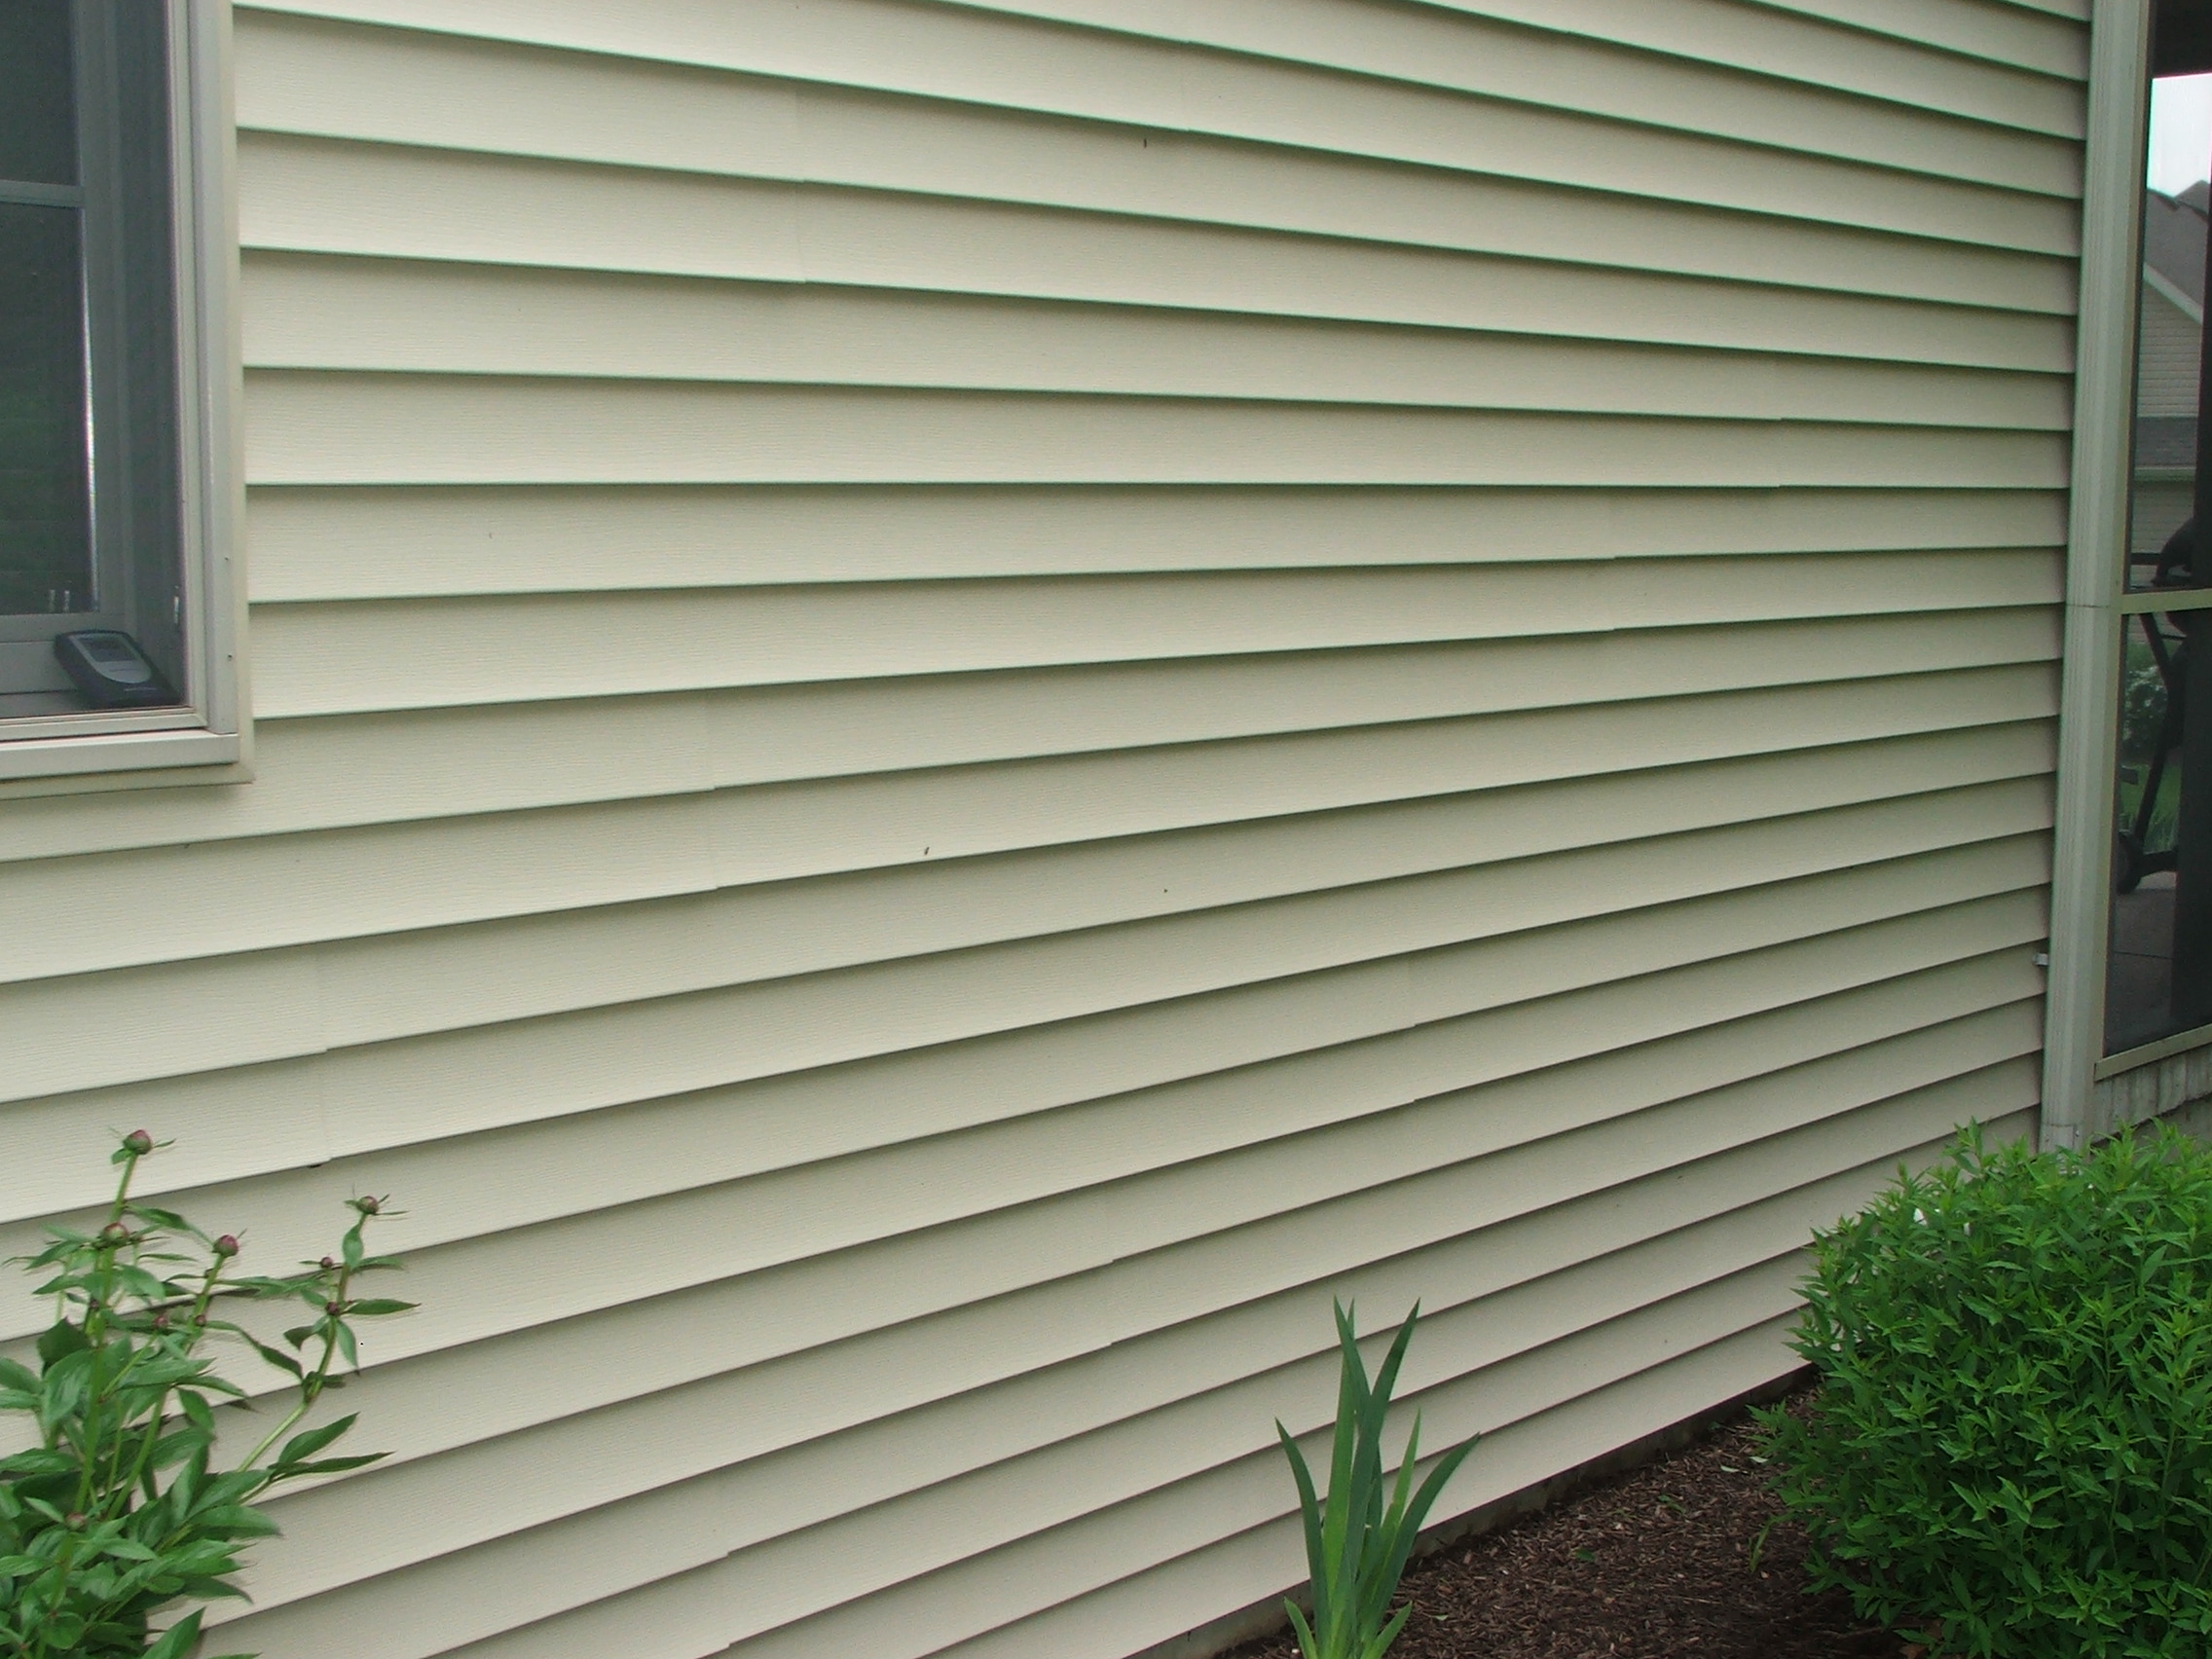 Vinyl siding after power washing and application of anti-growth algae product.